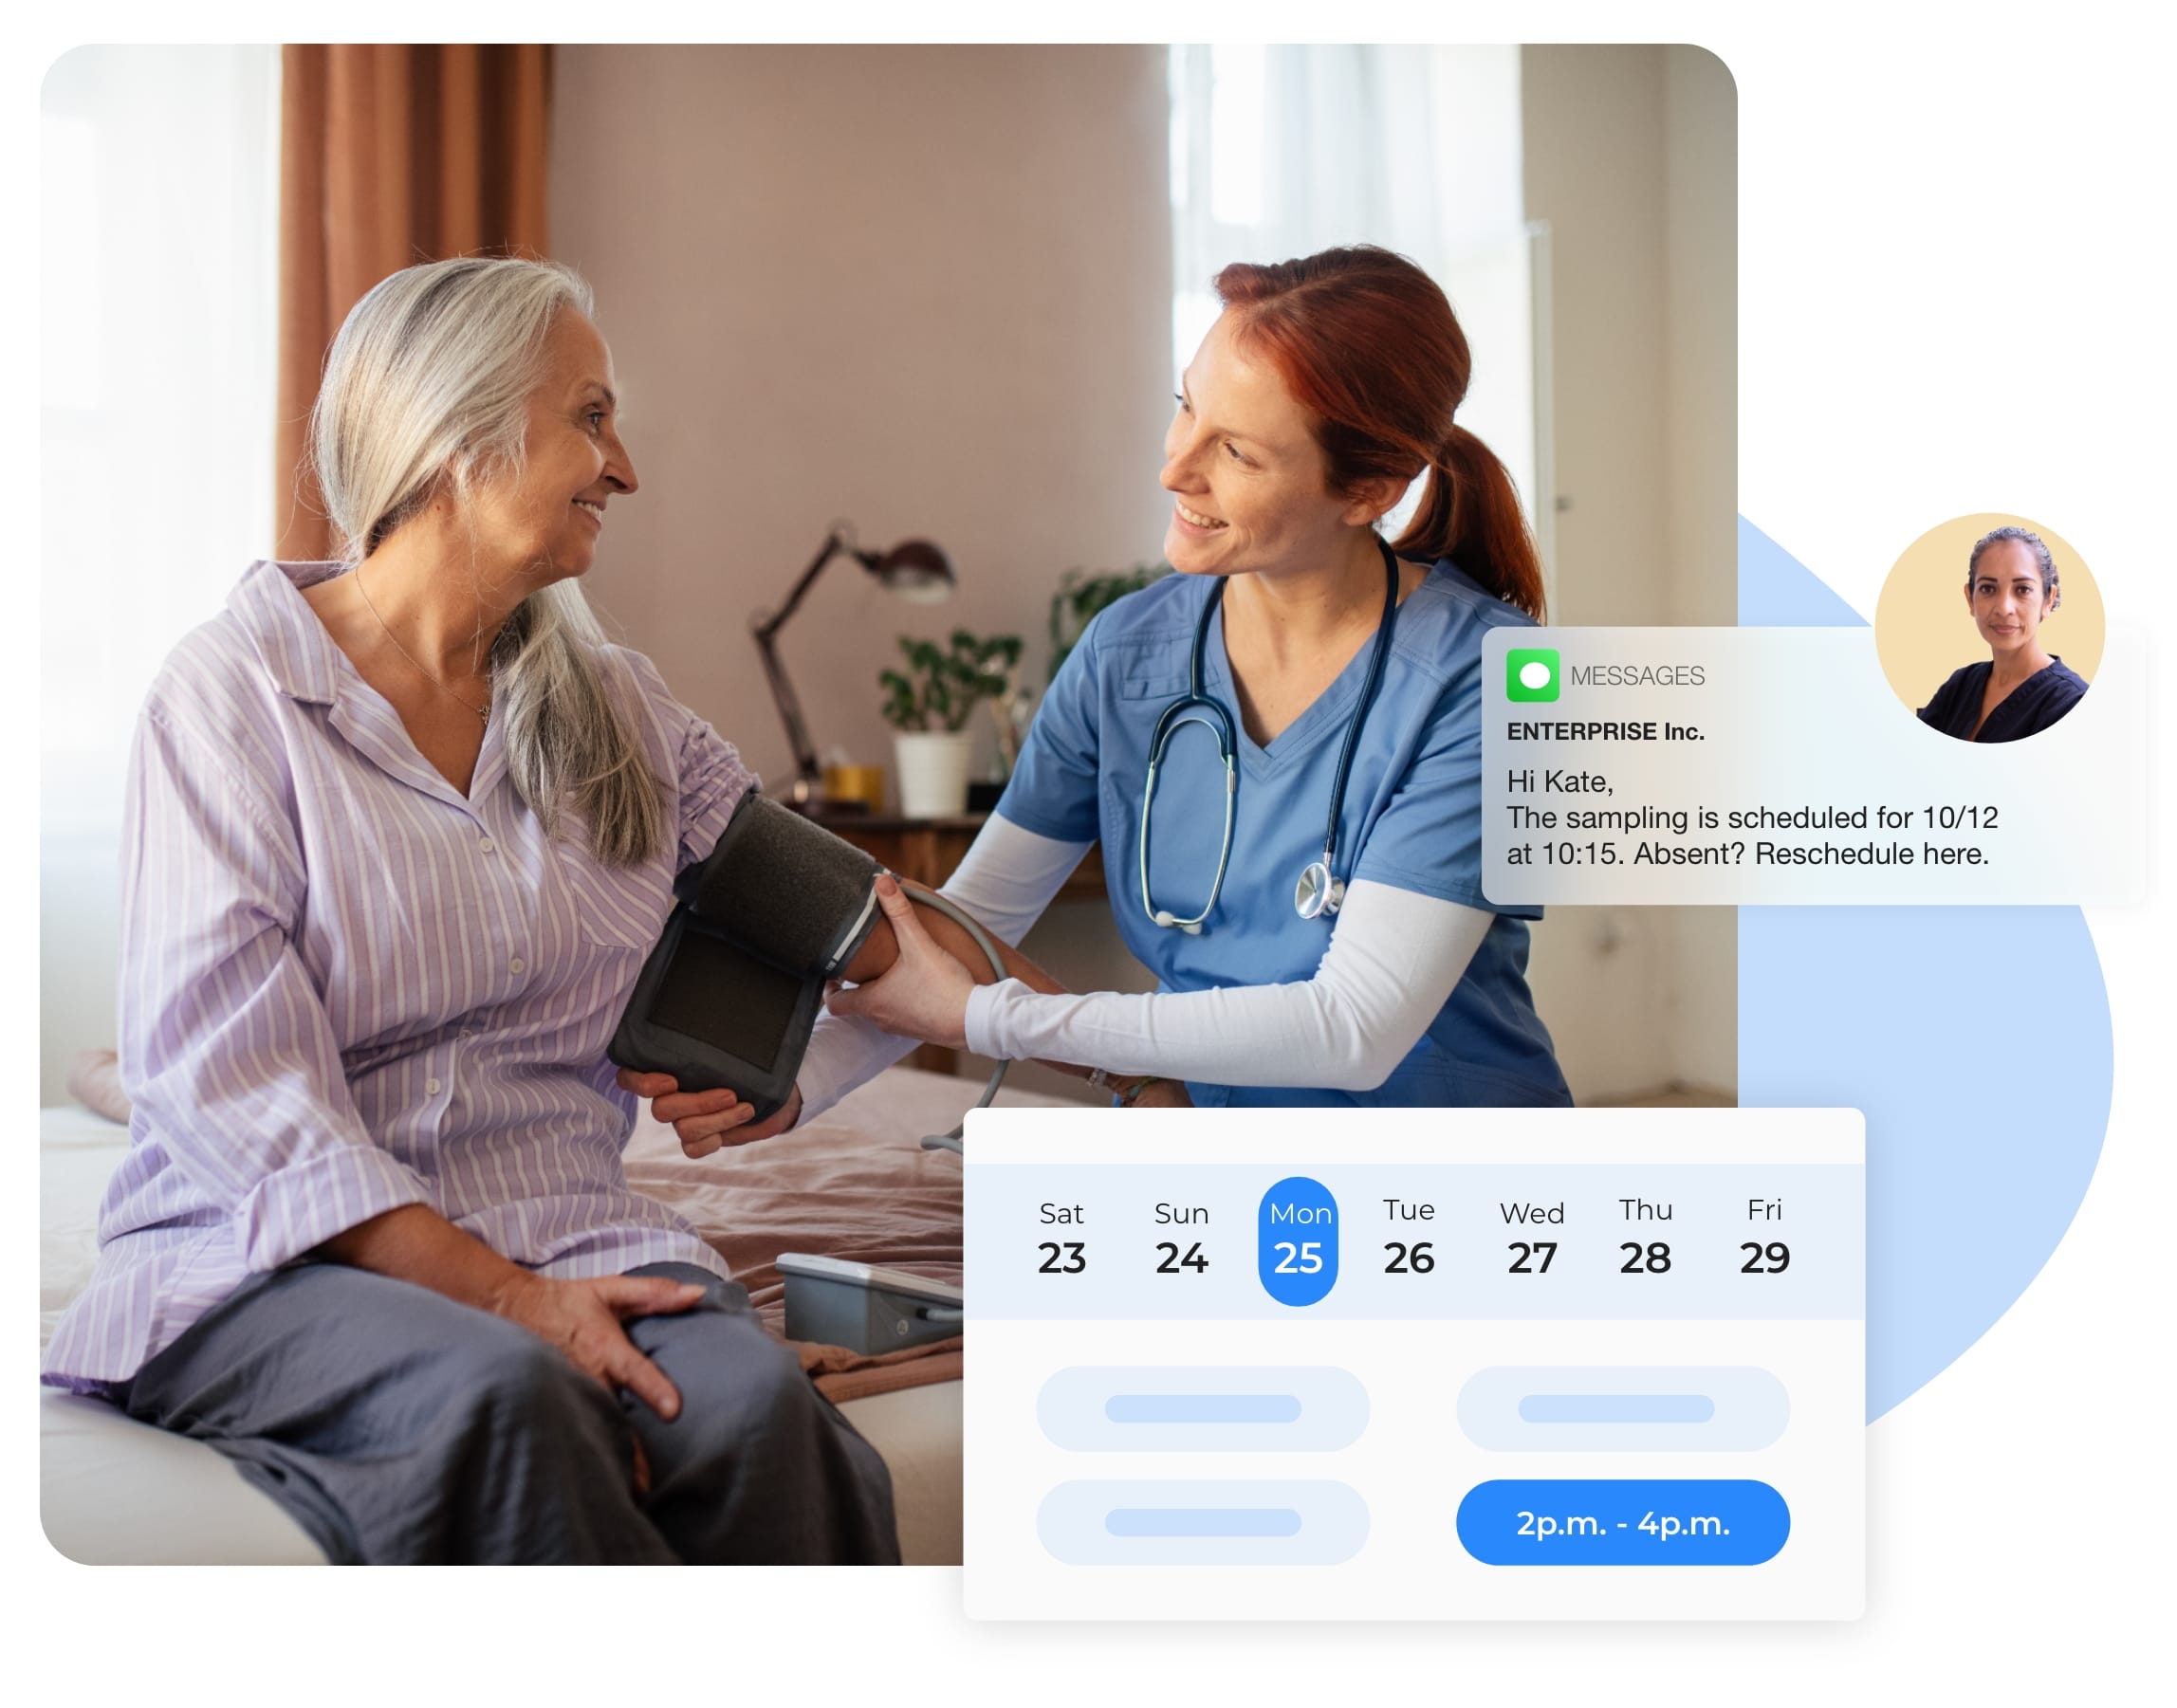 The platform offers quality home healthcare service to patient.